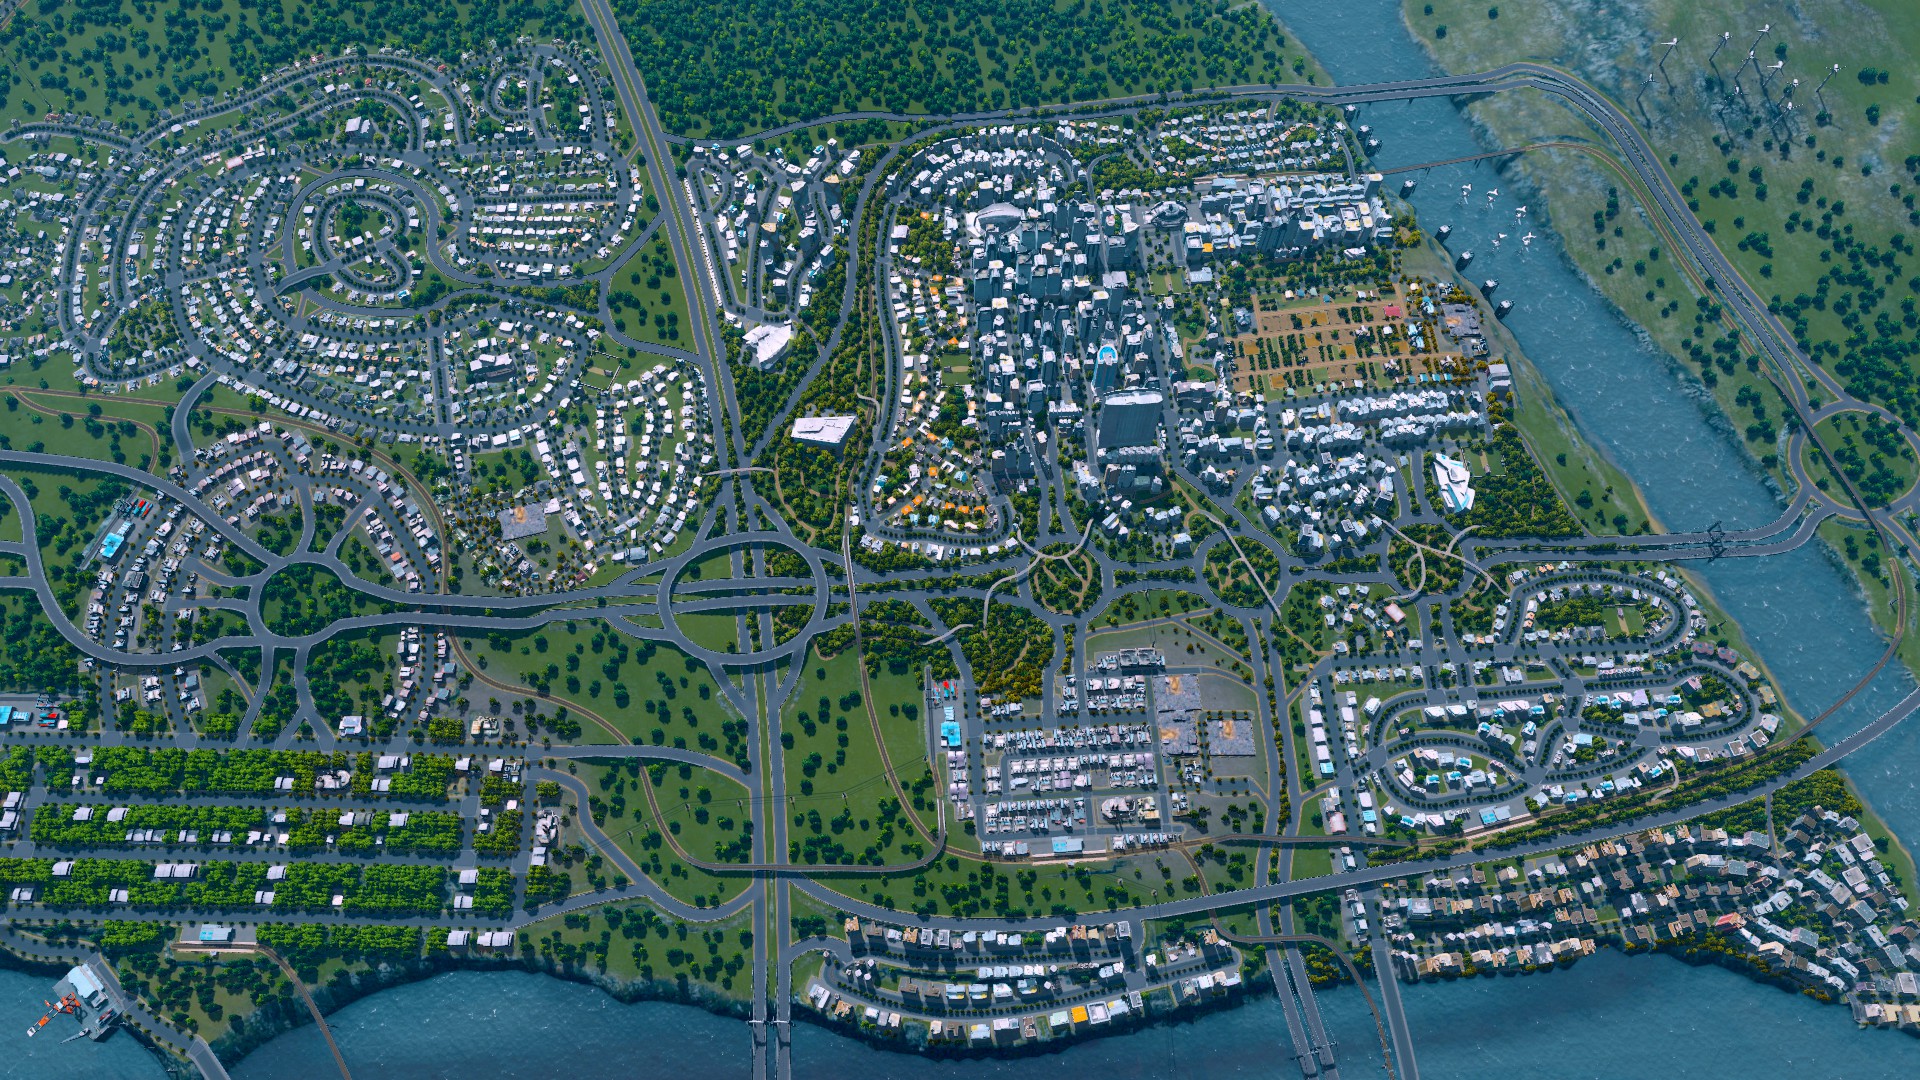 Cities: Skylines 2 - That's why the multiplayer is a problem according to  the developers - Aroged